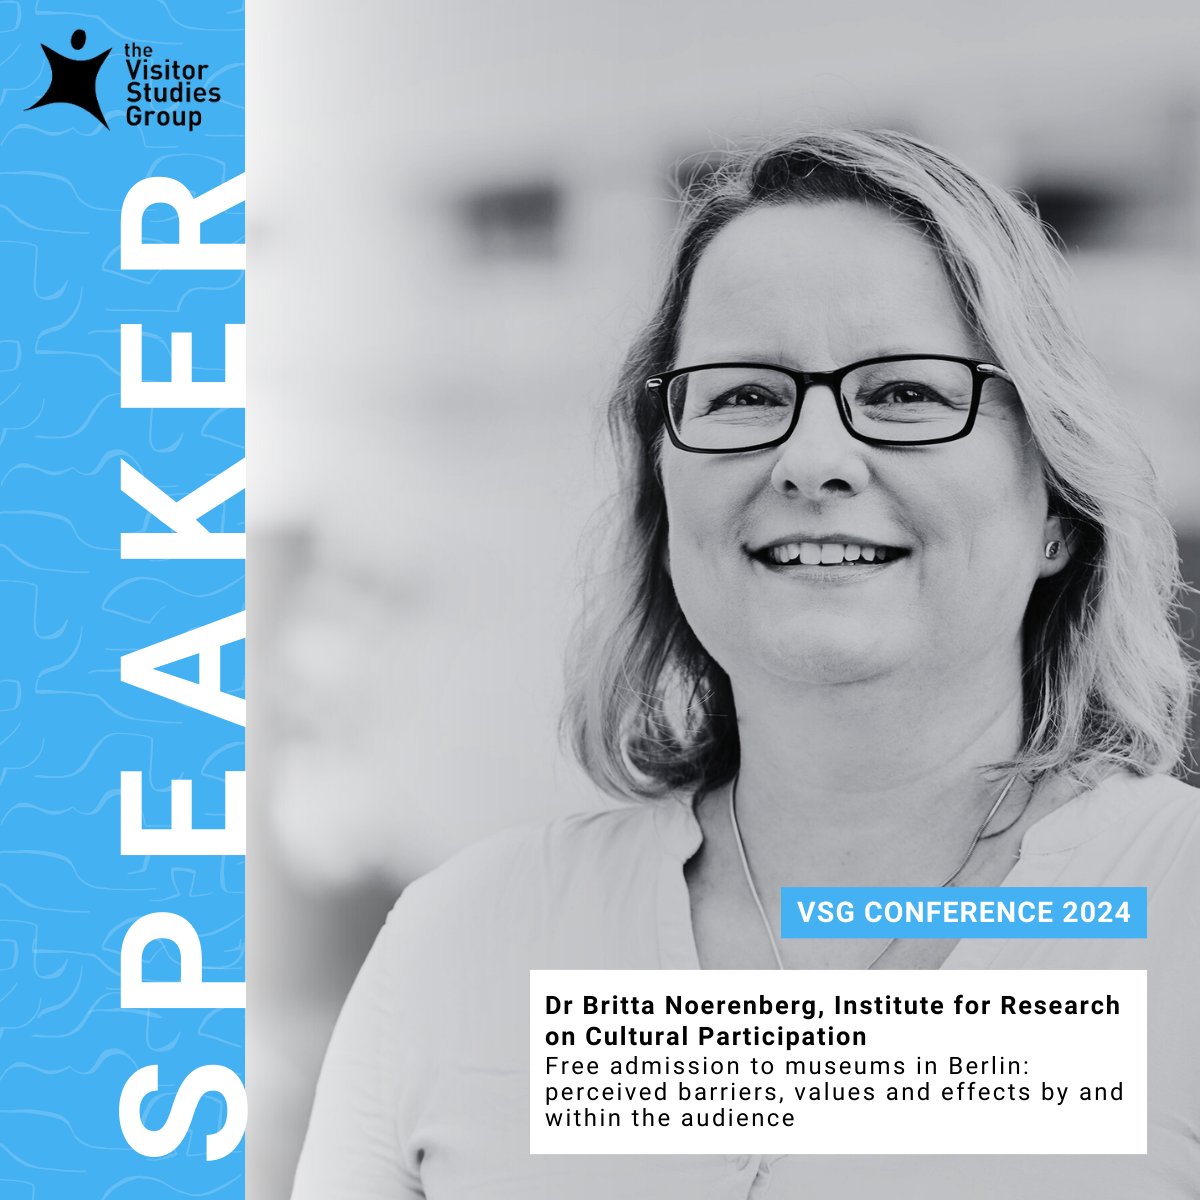 Announcing the first of our #CostofCulture VSG Conference 2024 speakers: Dr Britta Noerenberg, from @I_K_T_f , Berlin, speaking about free admission and perceived visitor barriers and perceptions. Haven't got your ticket? Book now: eventbrite.co.uk/e/visitor-stud…